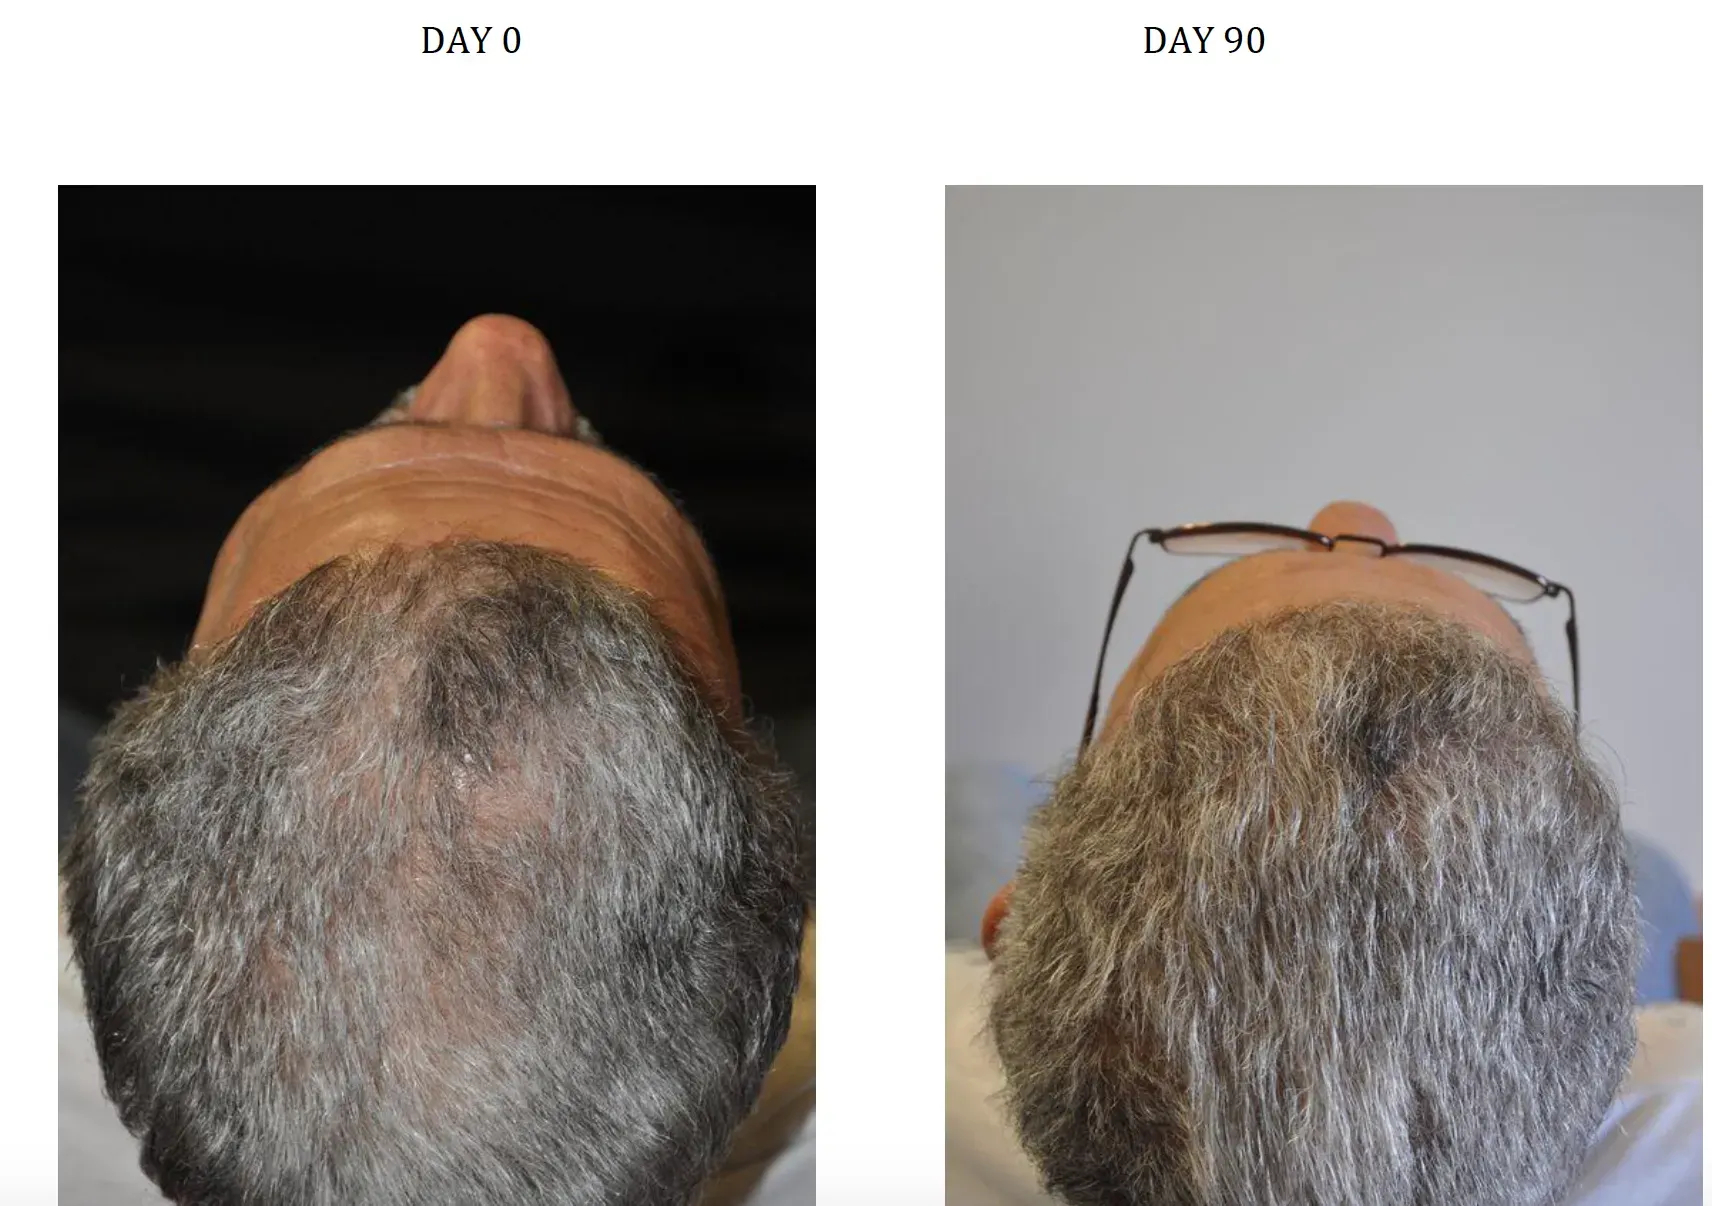 Before and after photos of hair growth by taking Nanoxidil